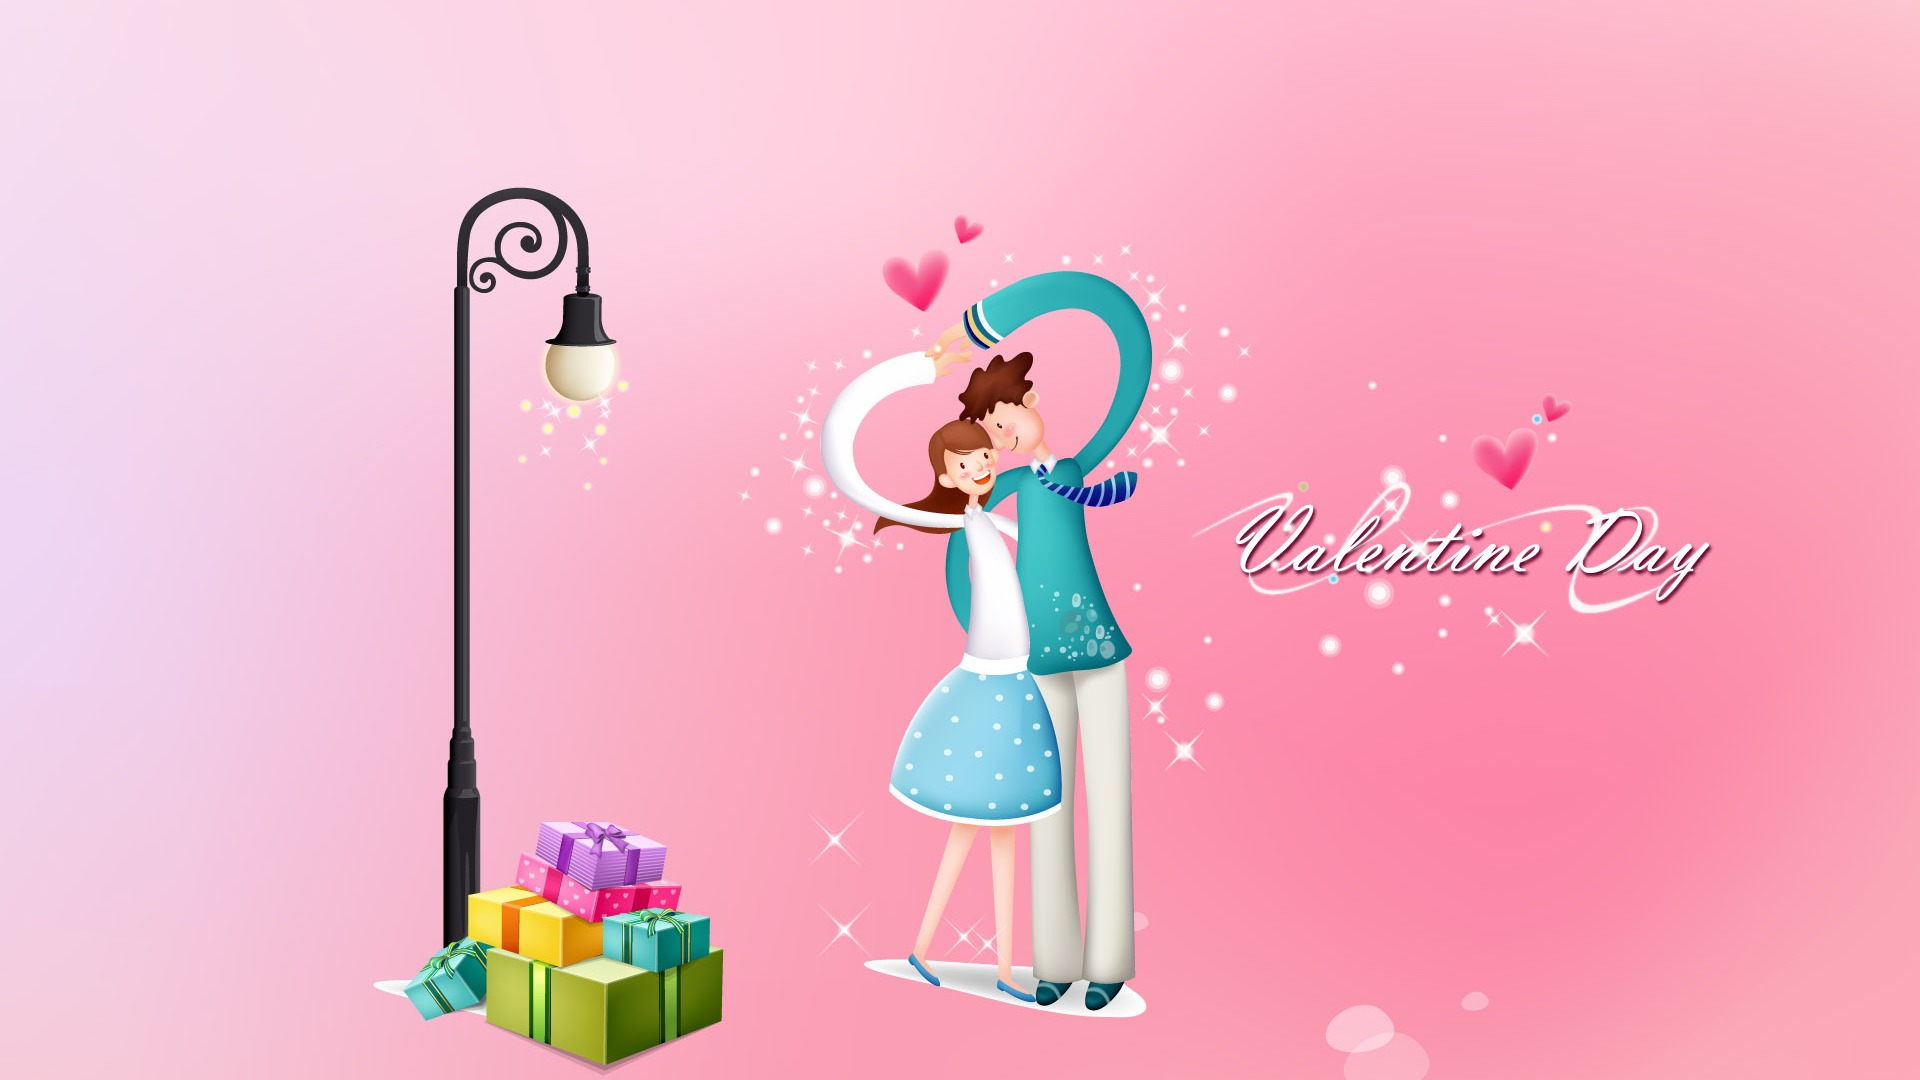 Valentine's Day Theme Wallpapers (2) #20 - 1920x1080